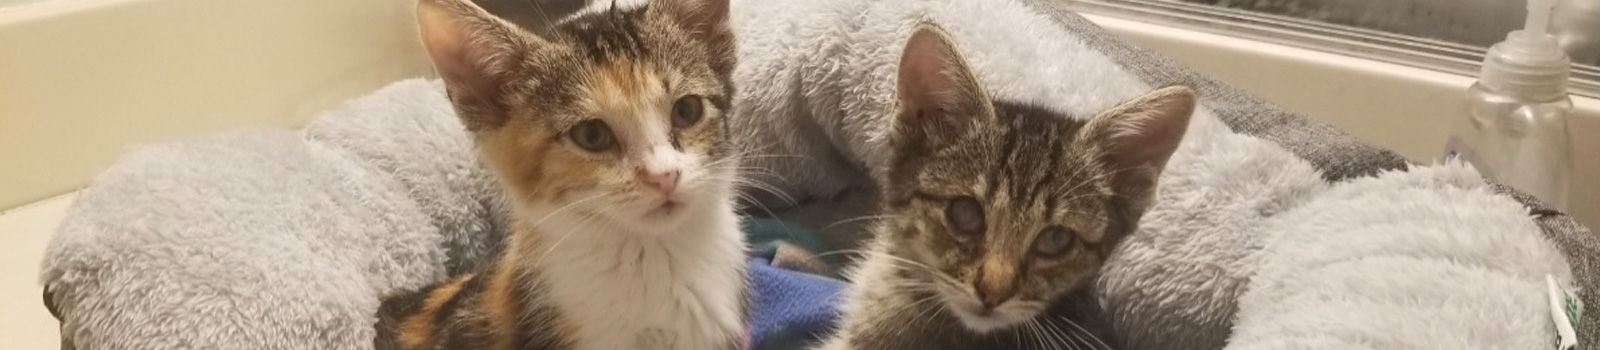 West Coast Cat and Kitten Rescue